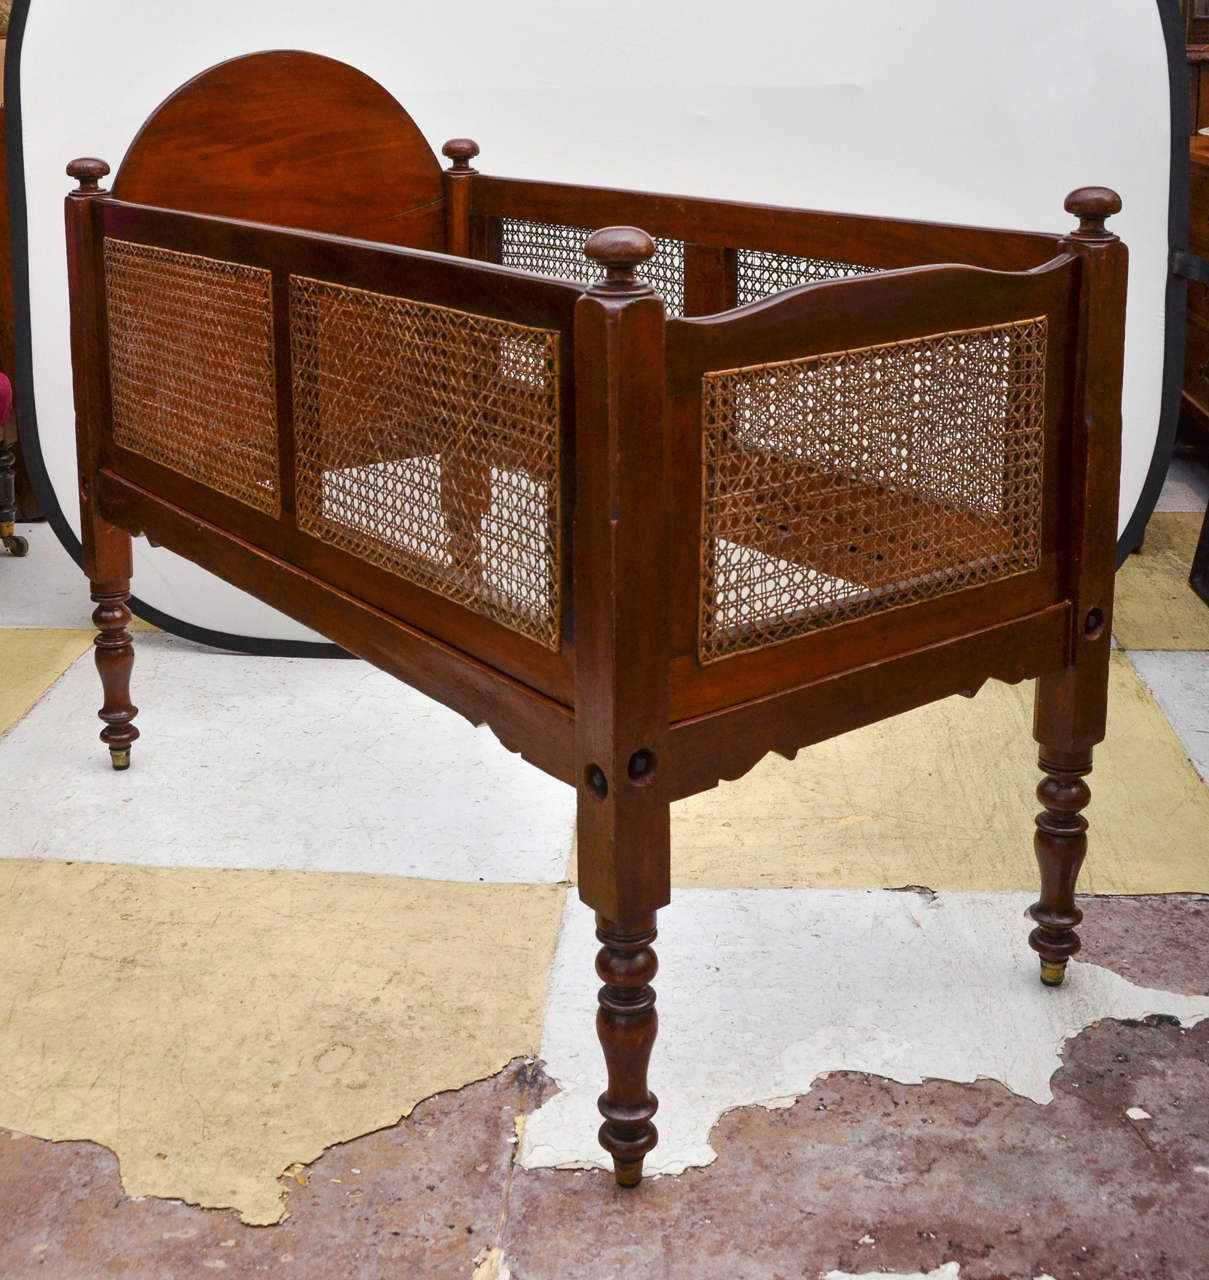 English early Victorian cane sided crib. The head board end is mahogany with a arch top. Each corner is capped with a knob shaped finial. The legs are of a turned a balustrade form with brass caps. Bottom end rails have a scalloped design. The caned